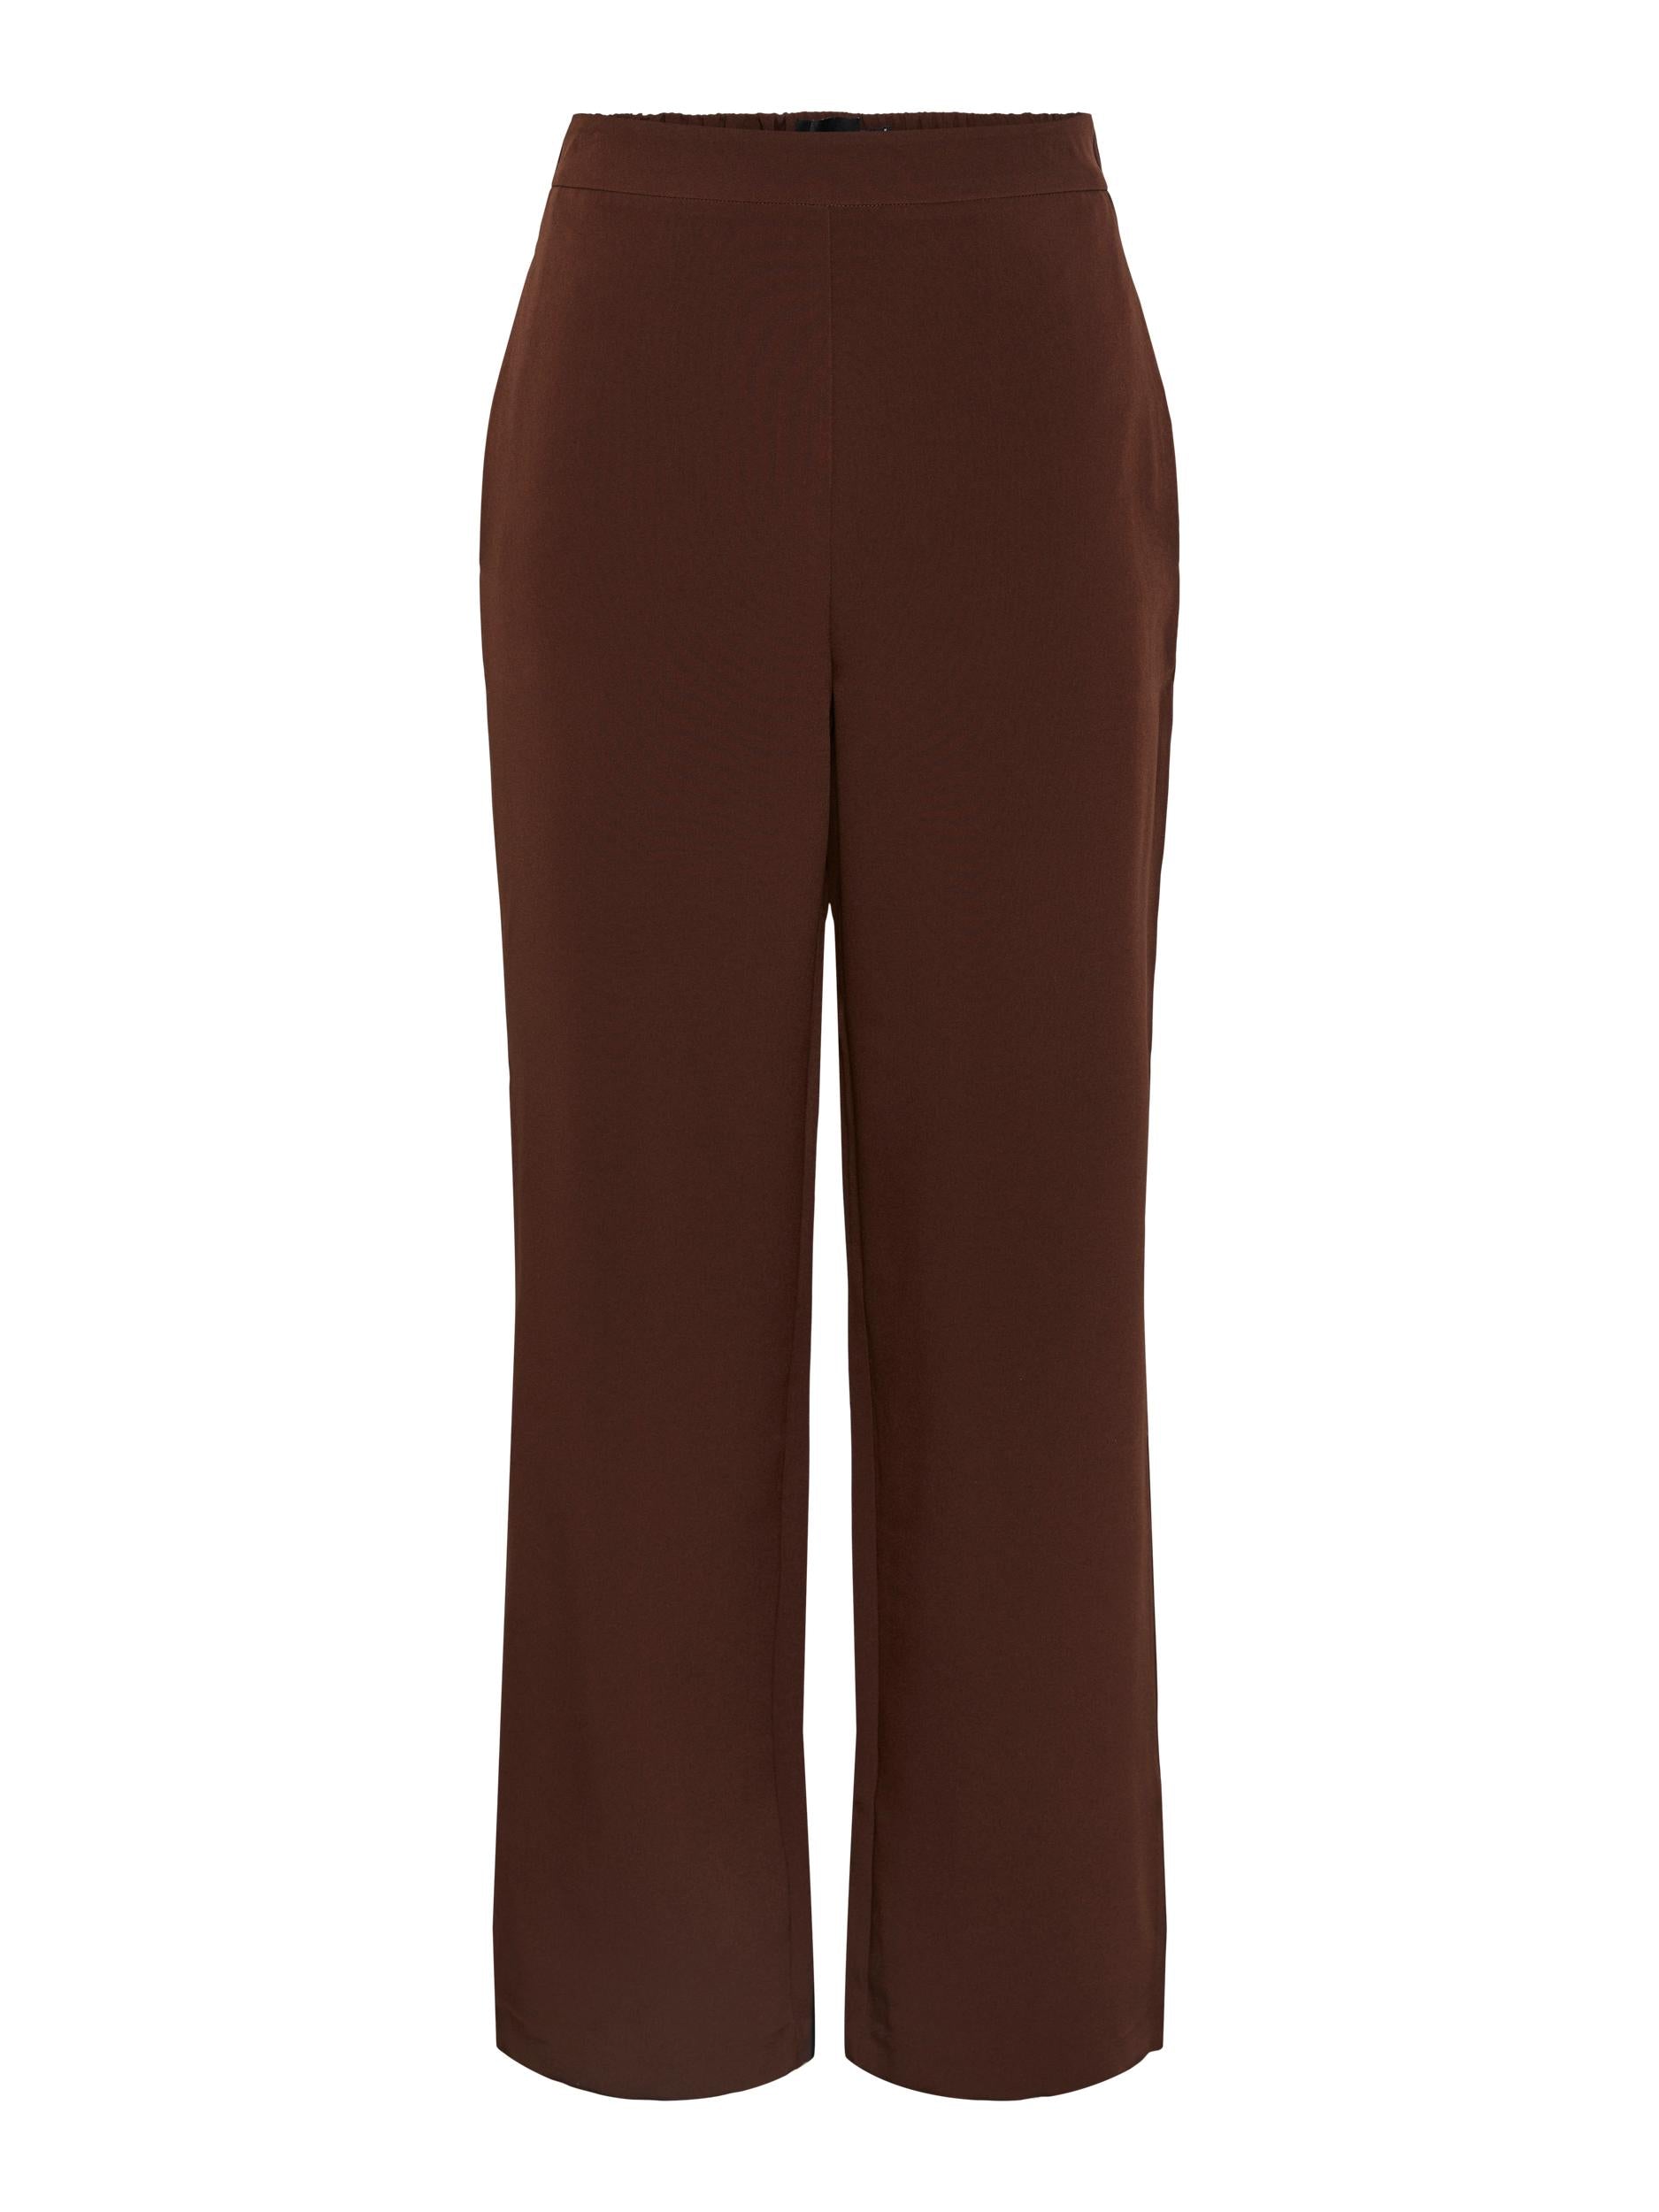 Pieces Bossy wide pants - Coffee